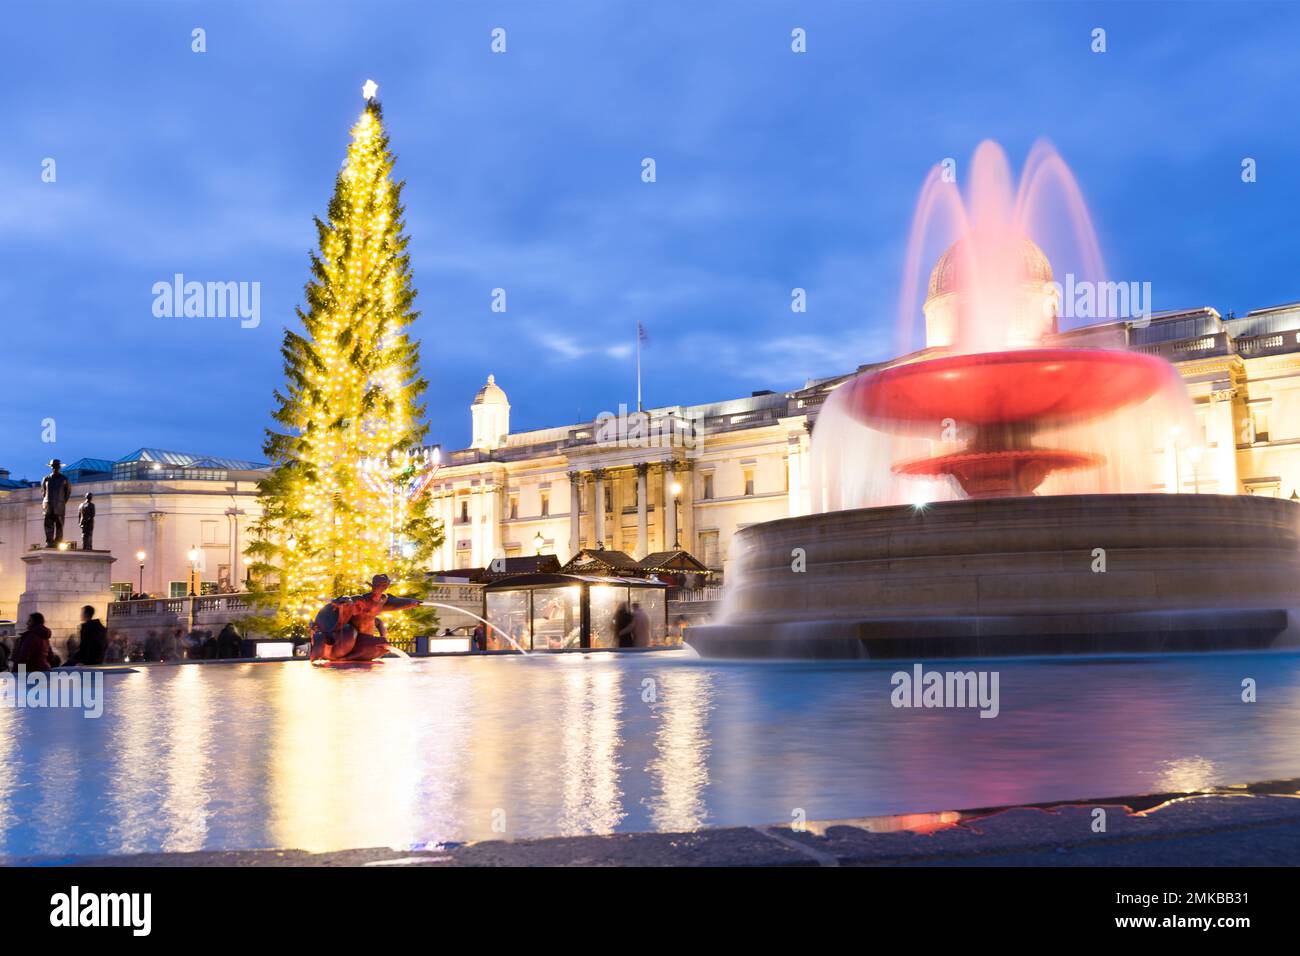 Christmas tree and lights at Trafalgar square in front of national gallery London Westend England UK Stock Photo